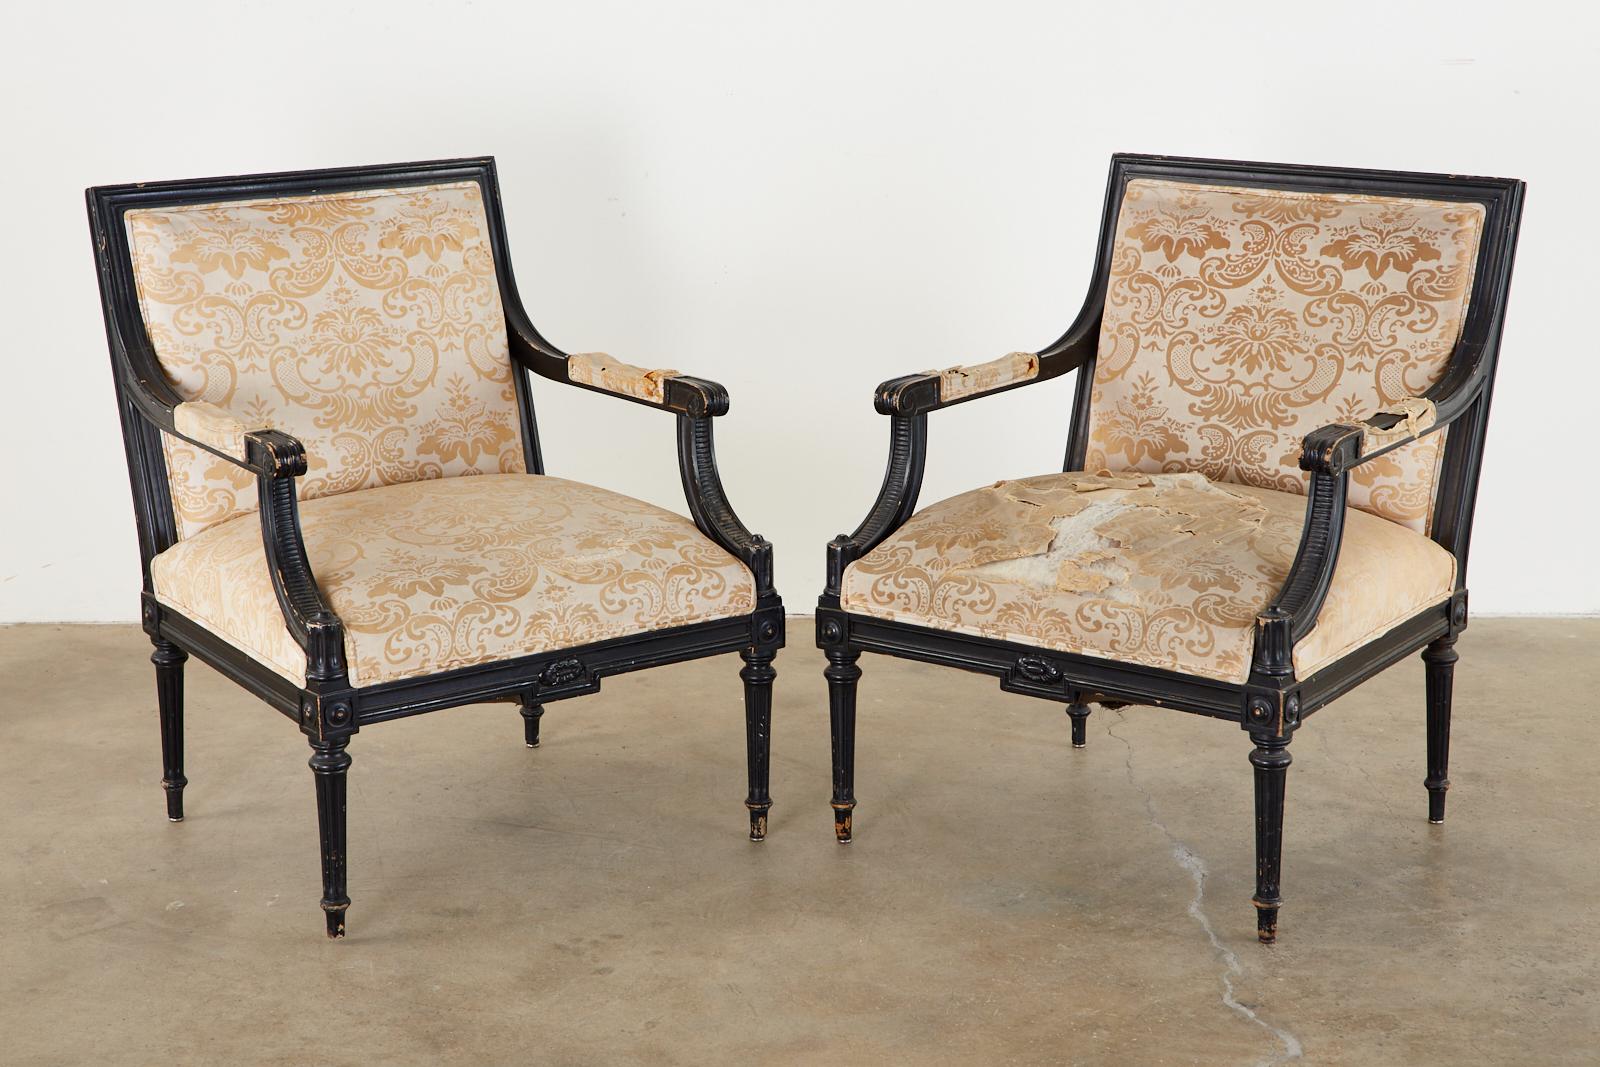 Ebonized Pair of French Maison Jansen Style Fauteuil Armchairs